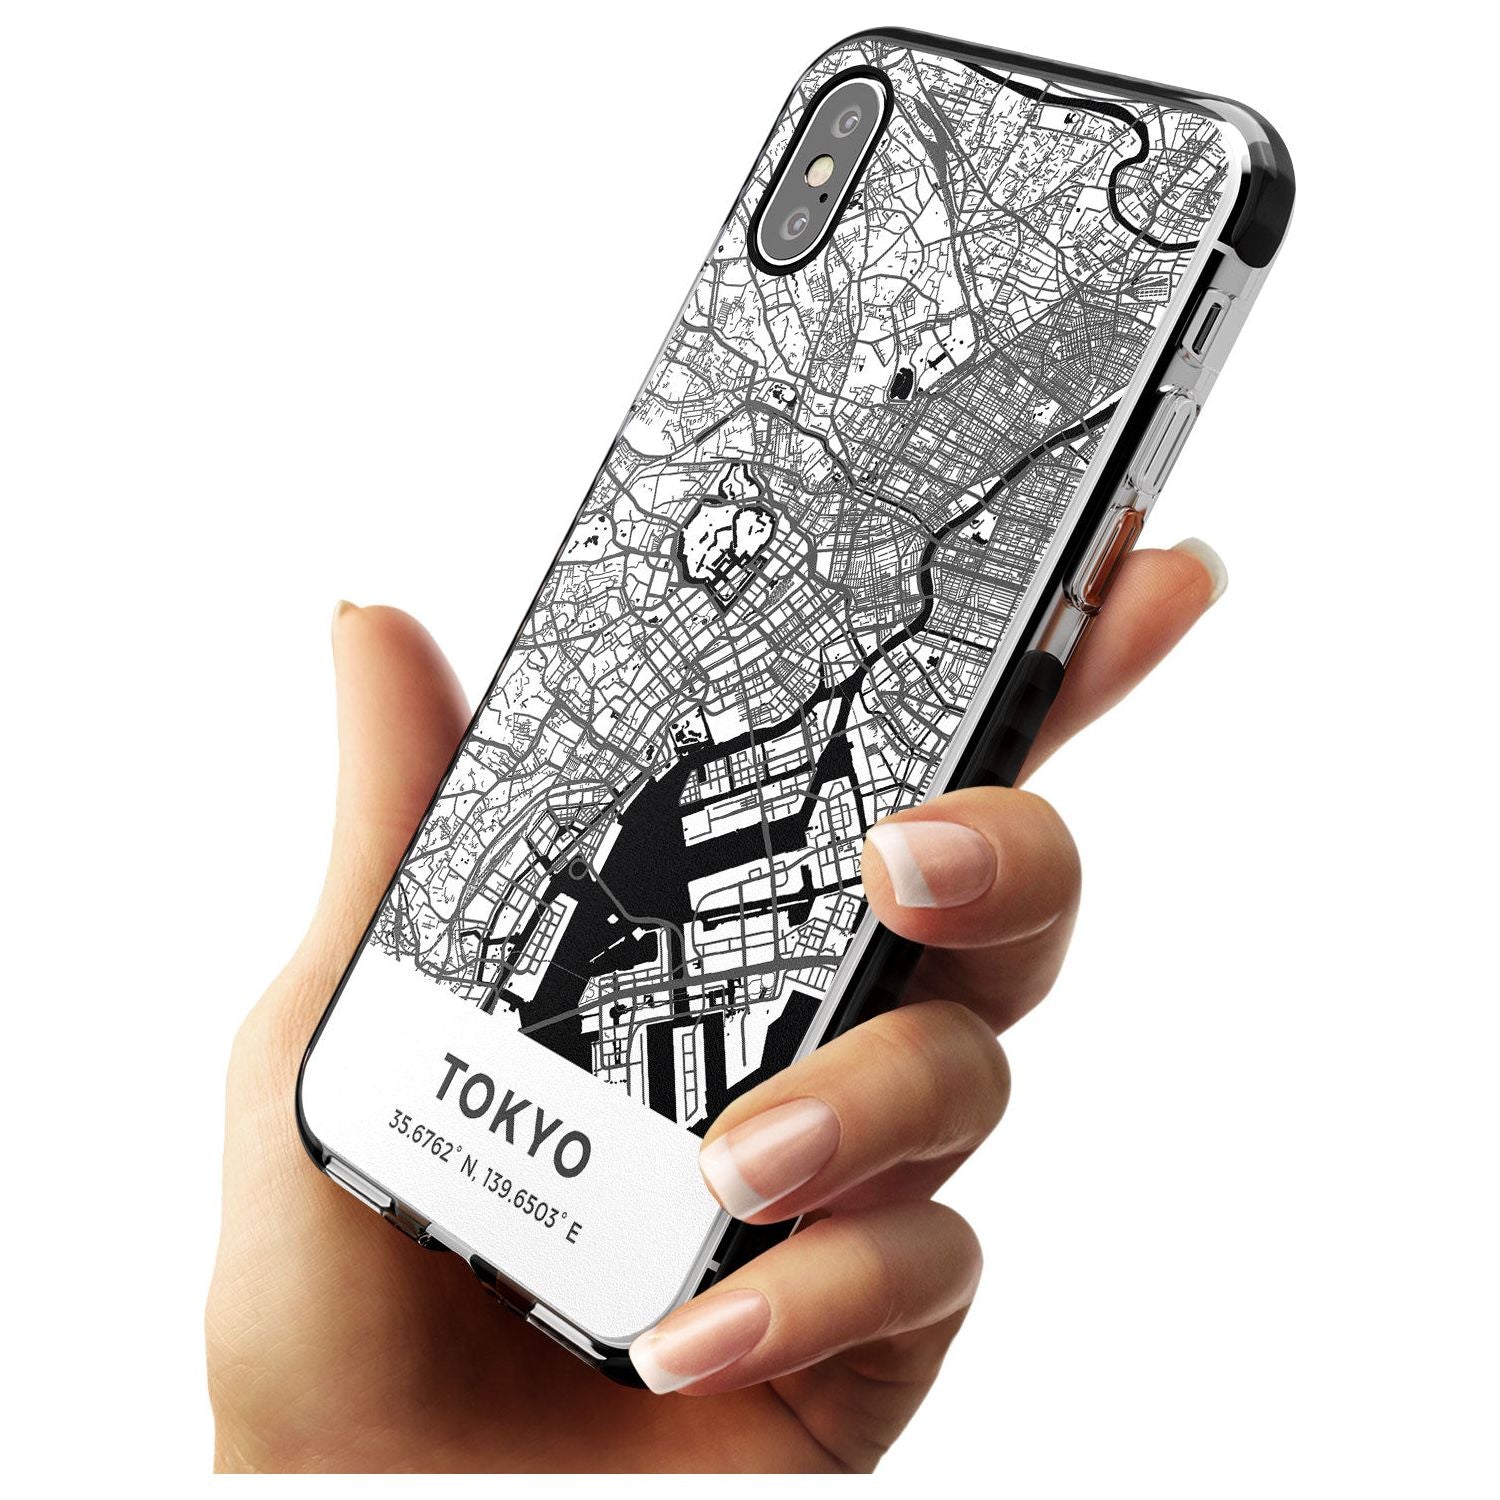 Map of Tokyo, Japan Black Impact Phone Case for iPhone X XS Max XR